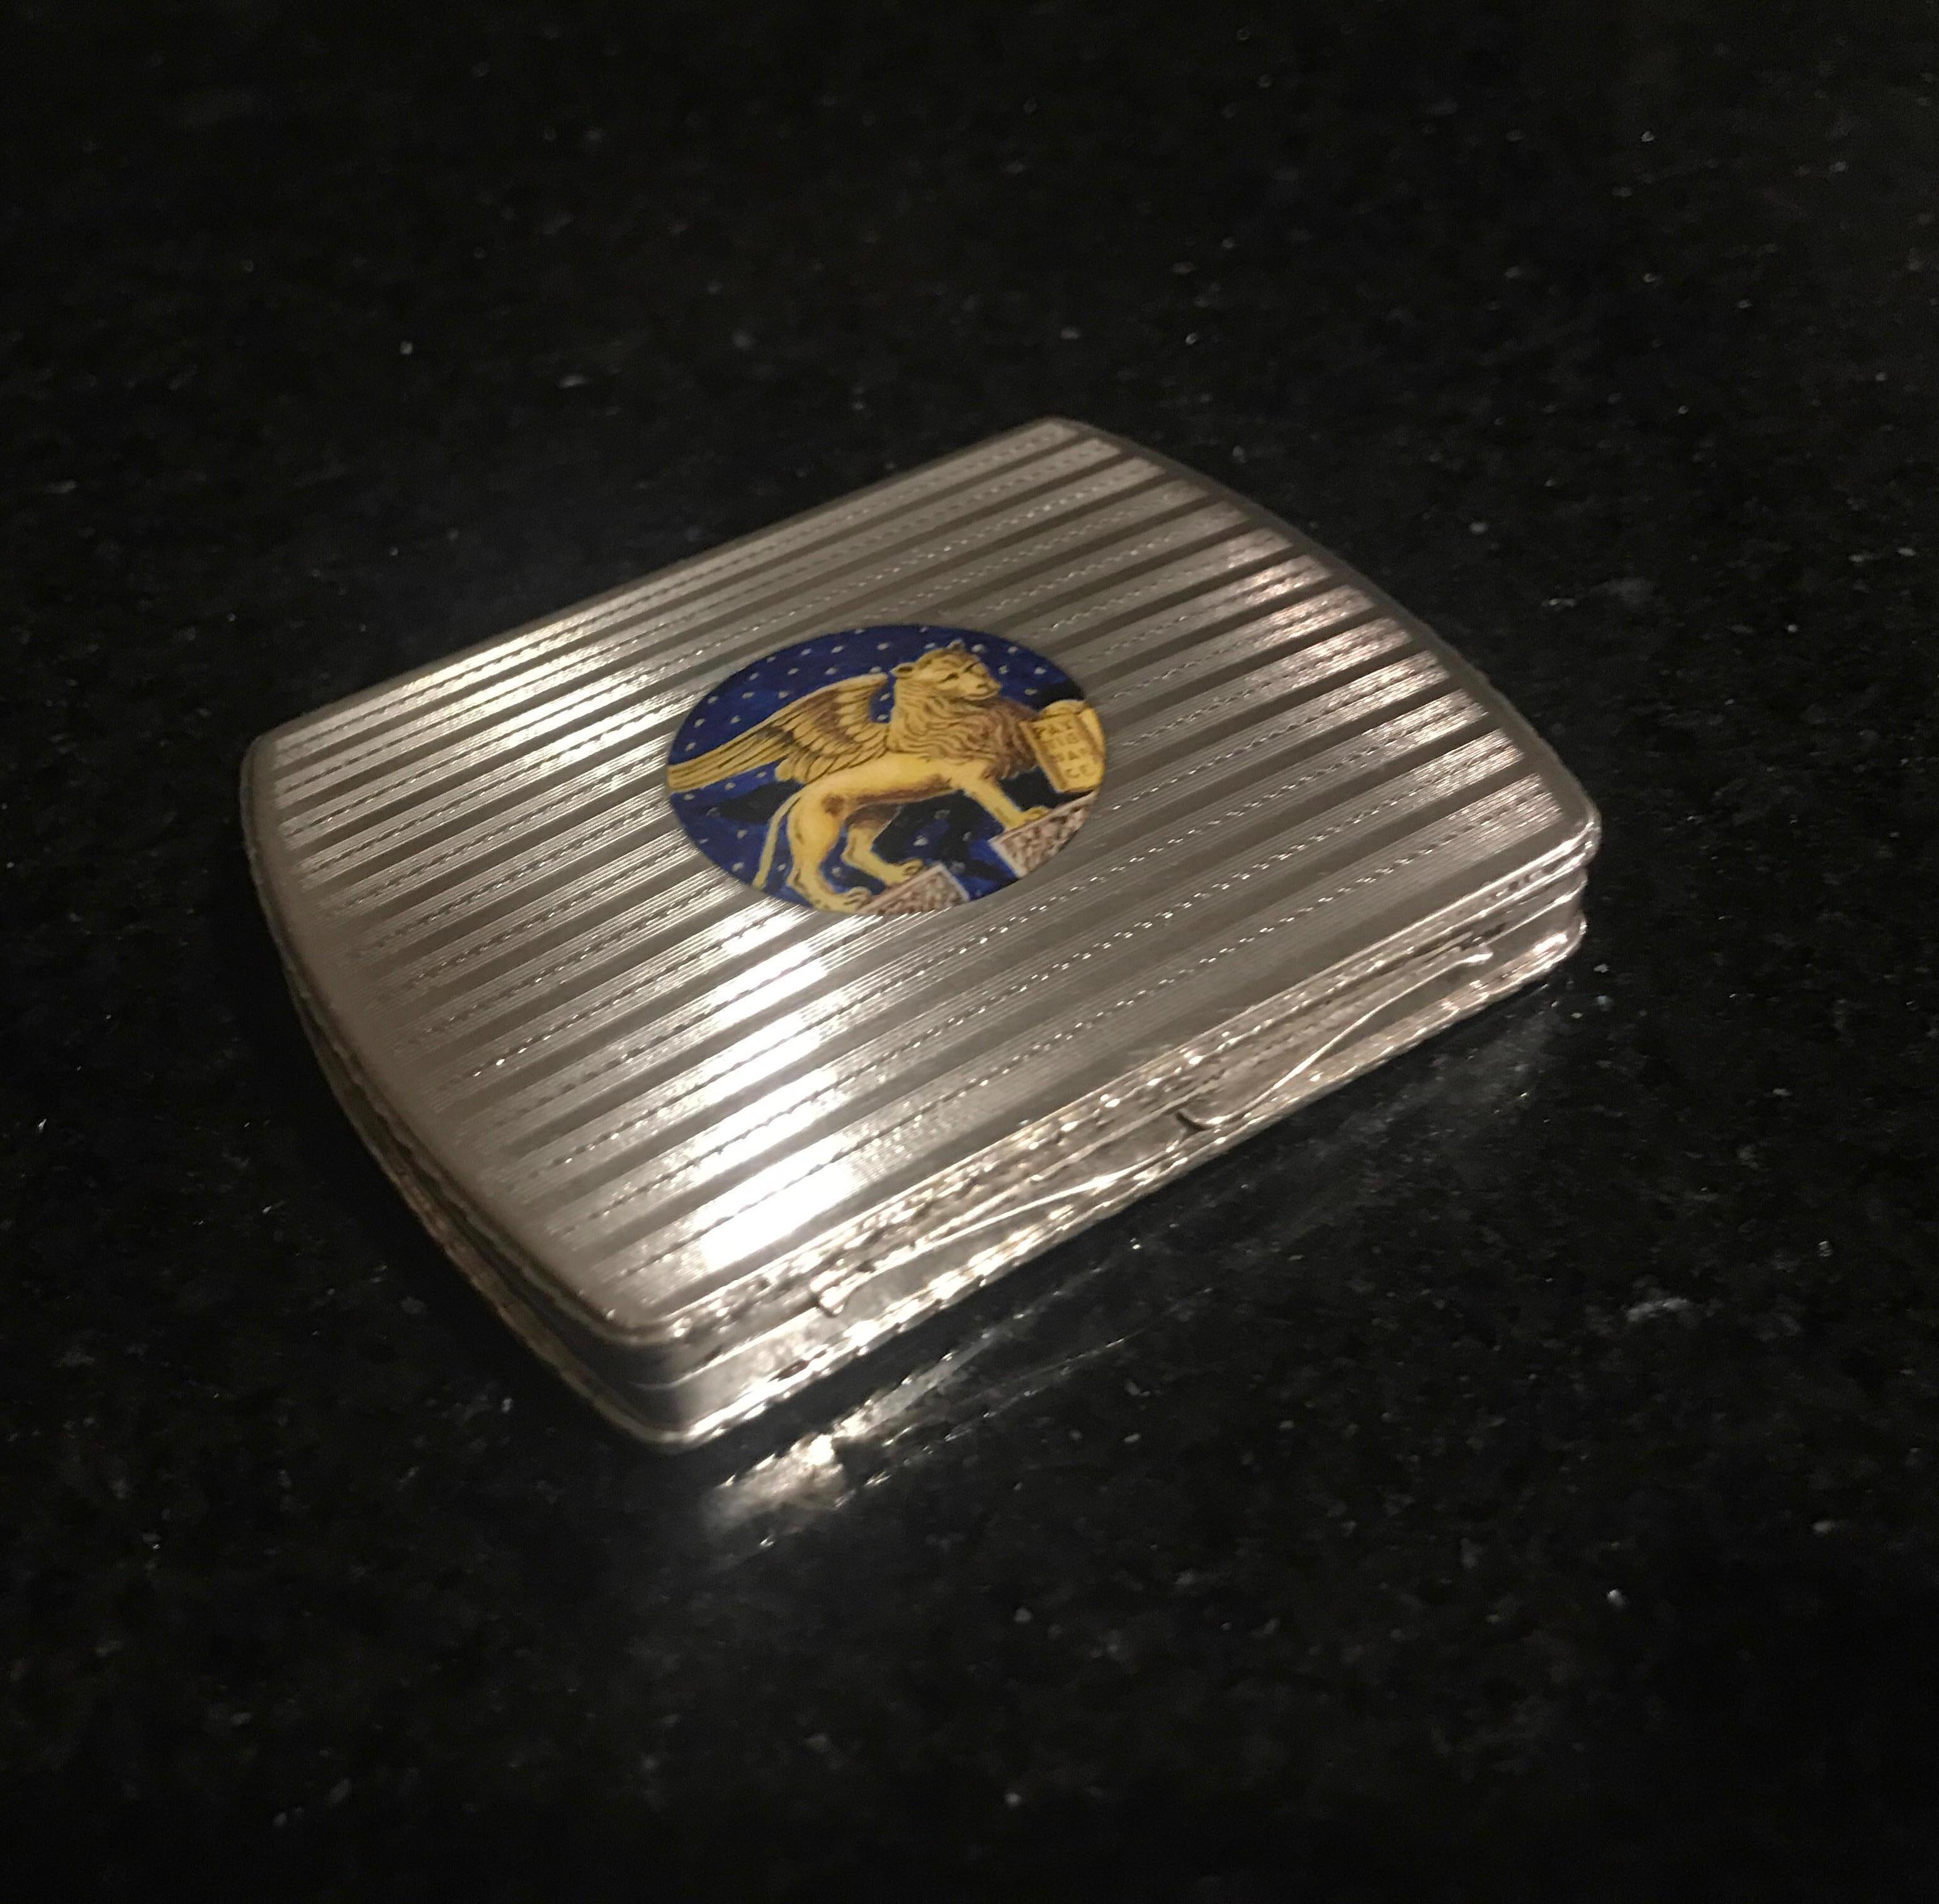 Solid continental silver hinged calling card or possibly cigarette case with enamel cartouch of the lion of Saint Mark. The 800 silver case with machine tooled pattern on the top and bottom with a gold wash on the interior. The inside is stamped